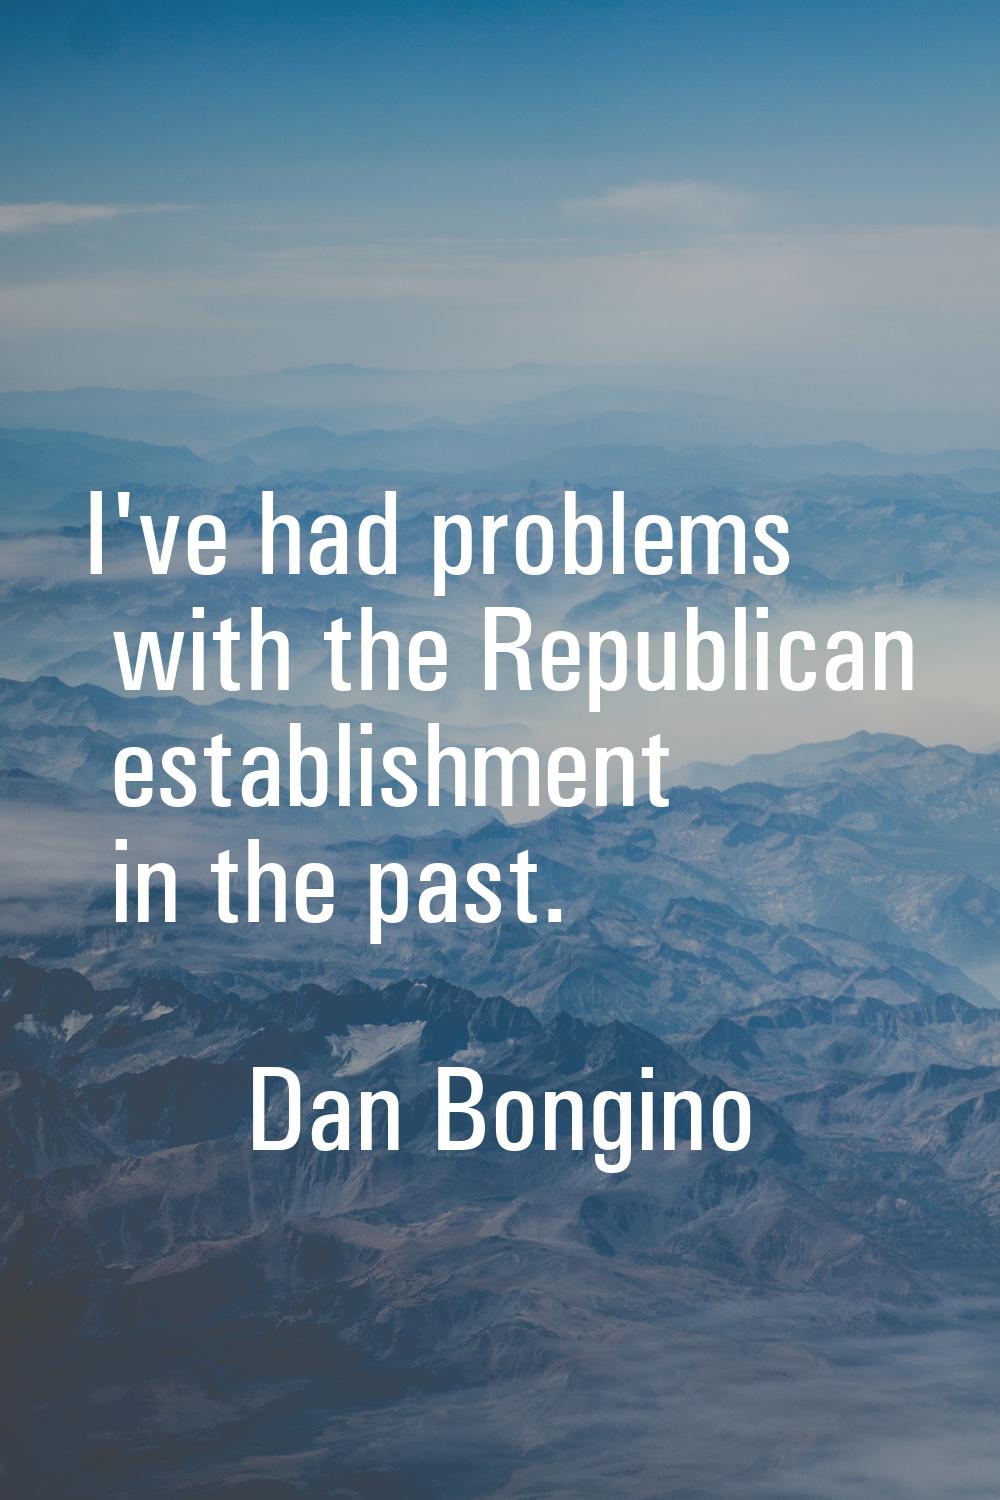 I've had problems with the Republican establishment in the past.